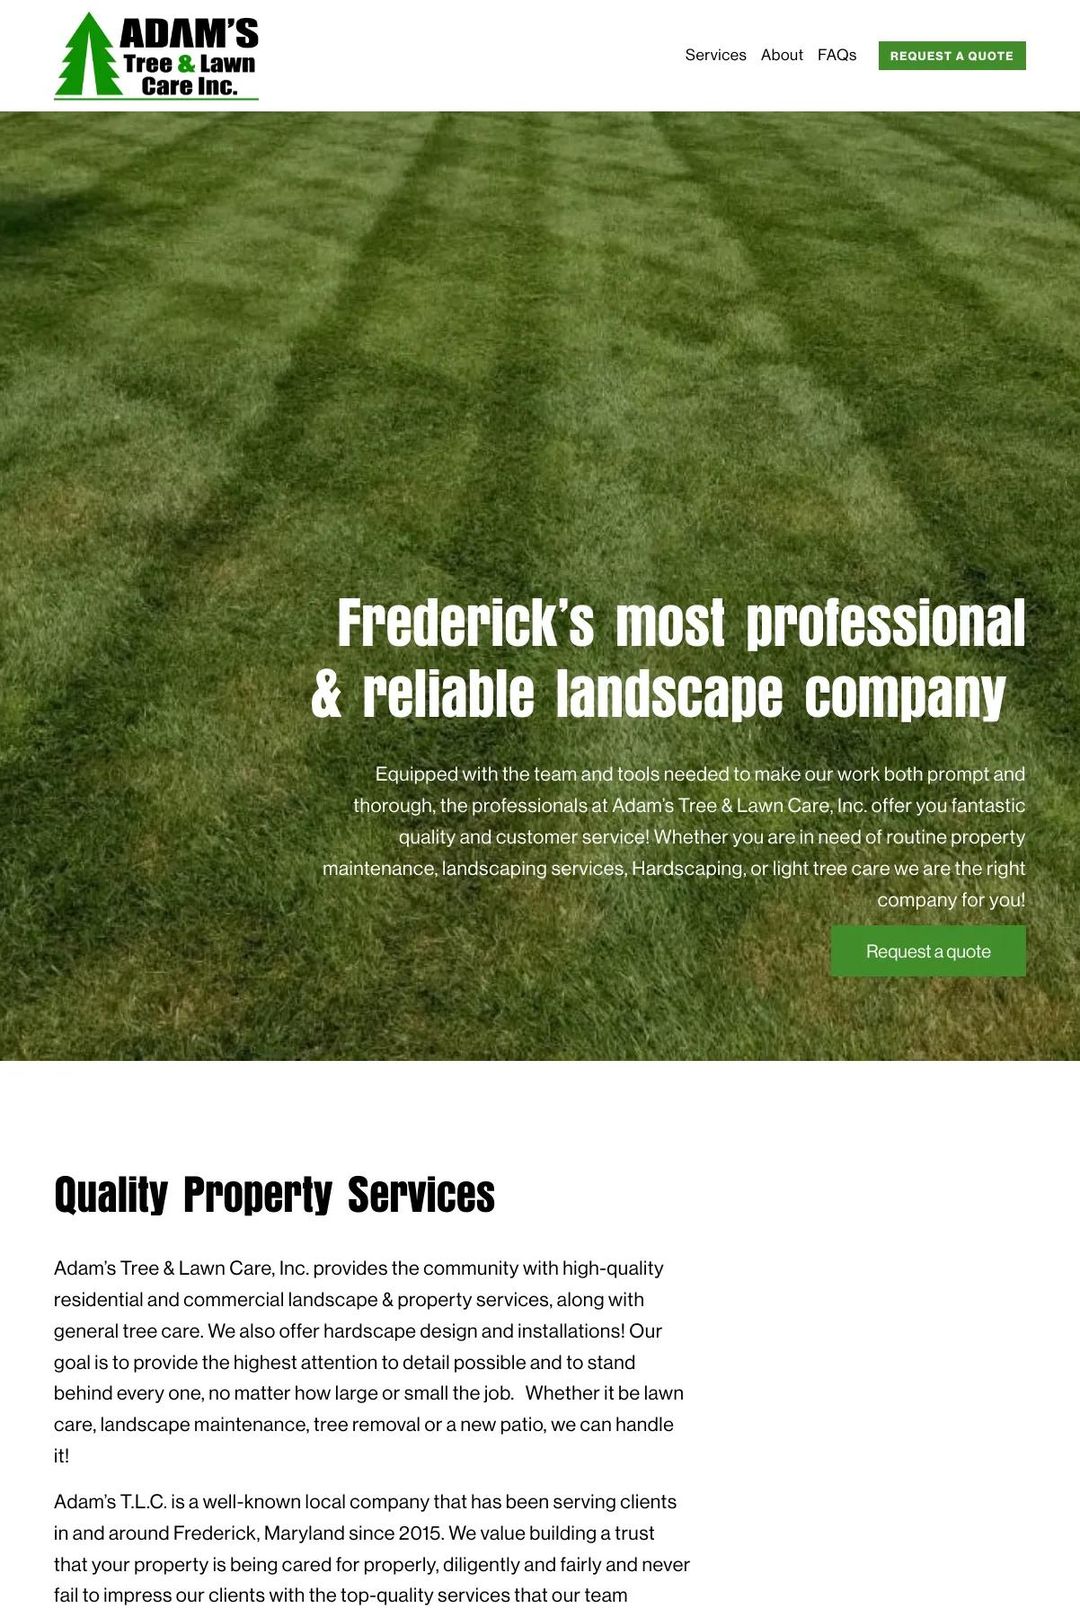 Screenshot 1 of Adam's Tree & Lawn Care (Example Squarespace Lawn Care Website)